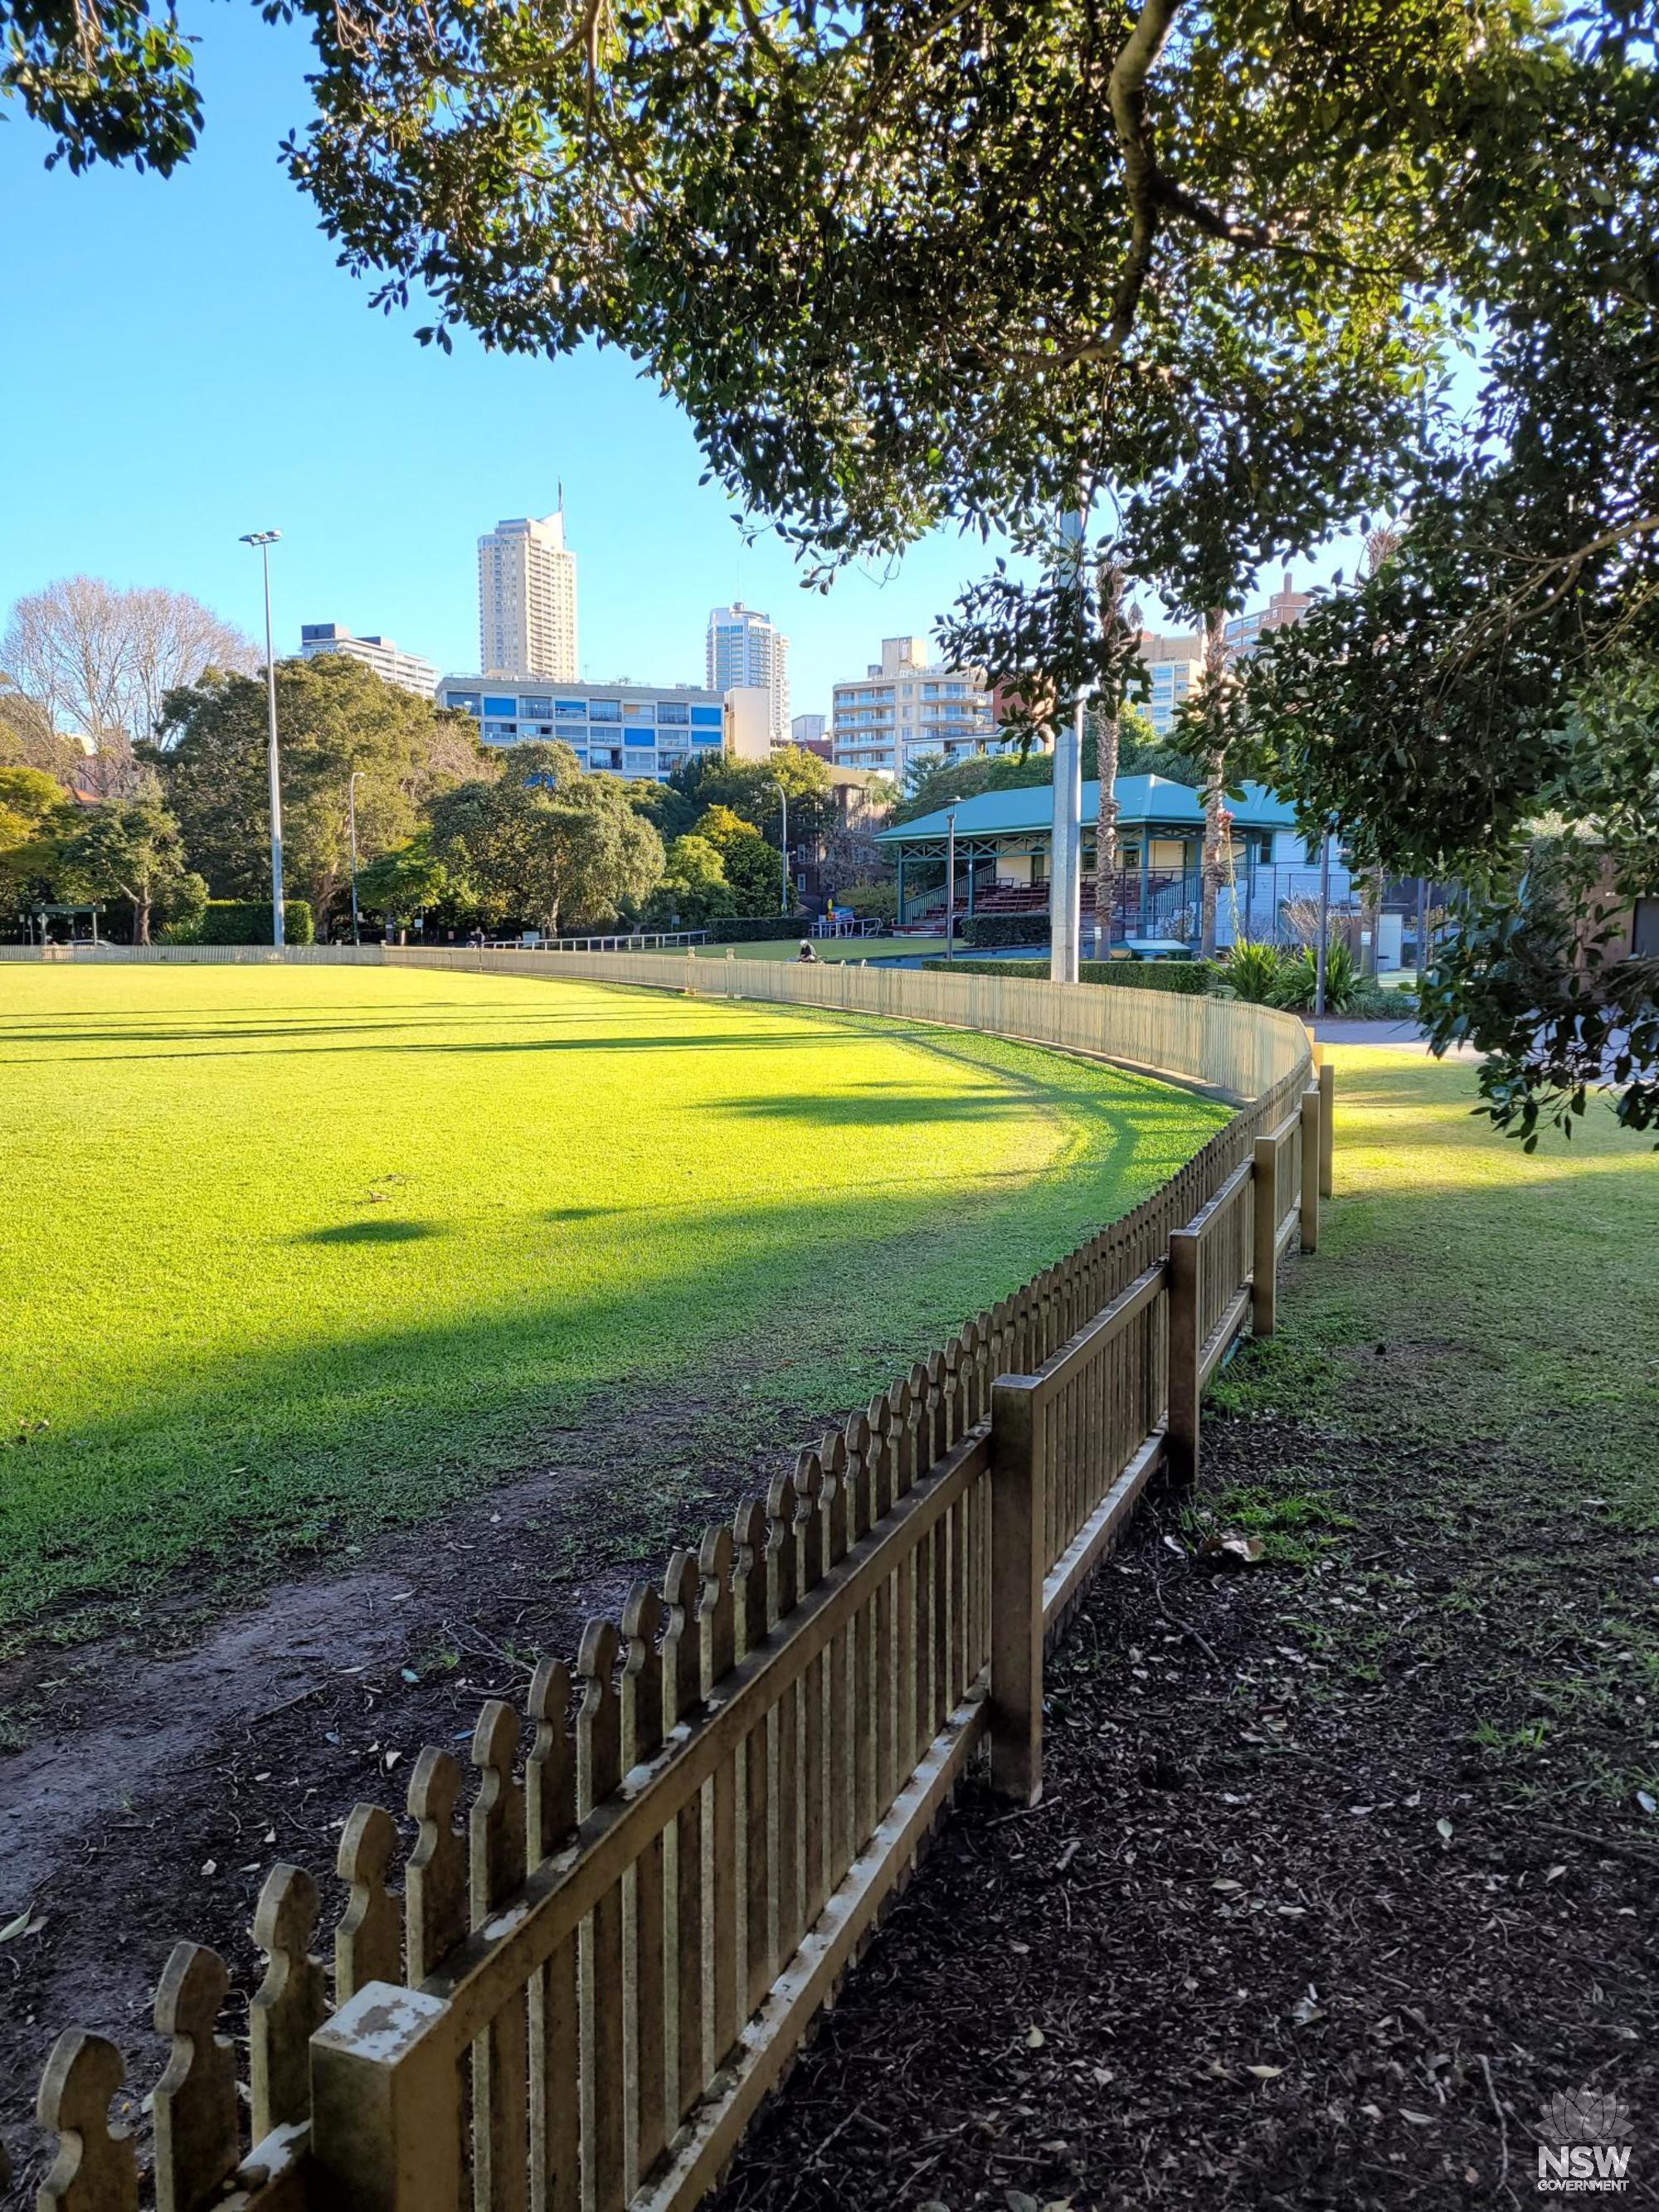 2022 6 15_Rushcutters Bay Park west Reg Bartley Oval and grandstand_Stuart Read